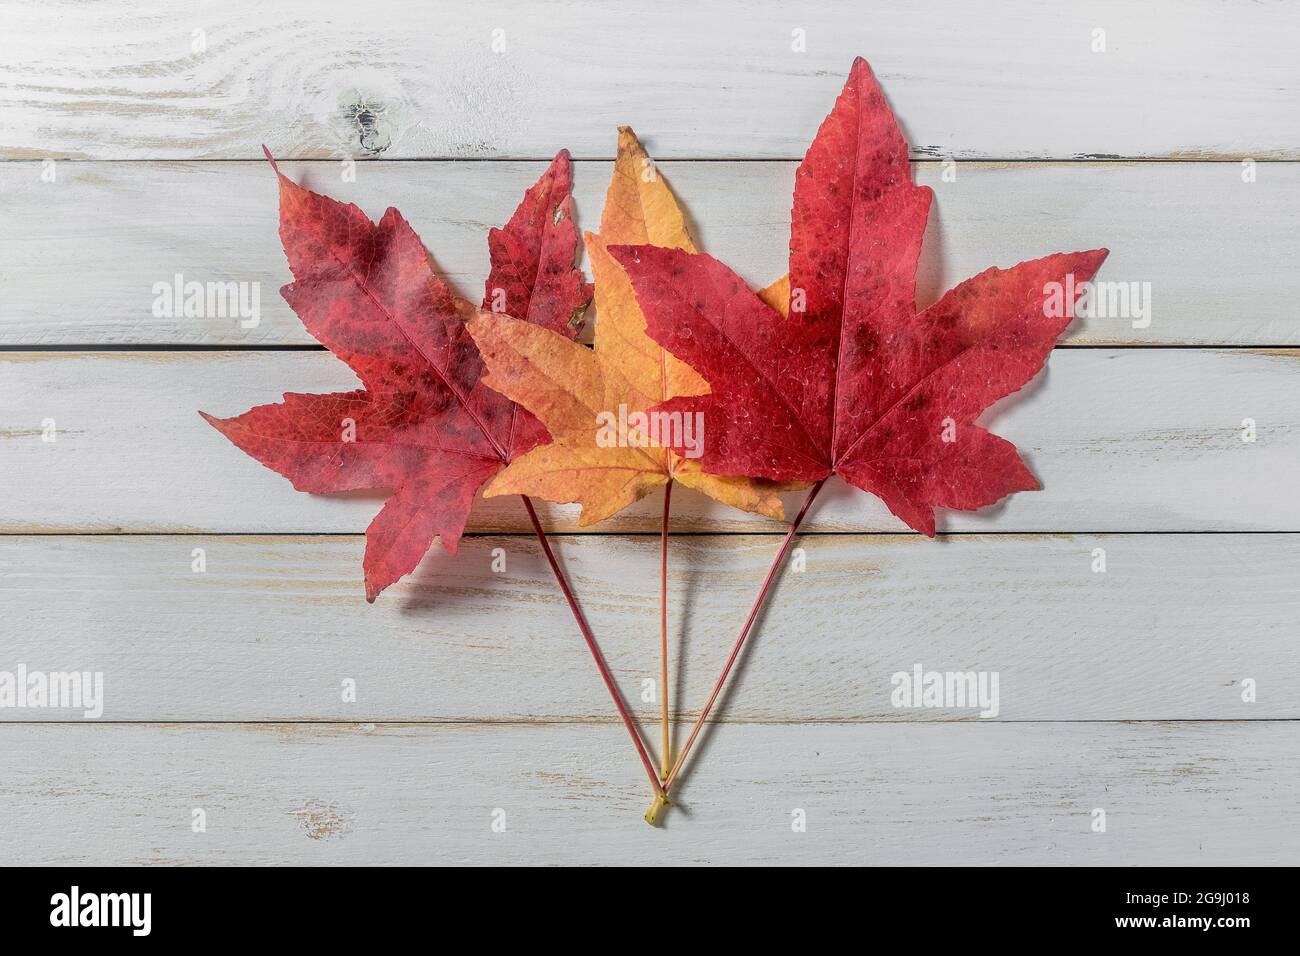 Autumn maple leaves on a white wooden background with graduated colors from red to yellow arranged in line Stock Photo